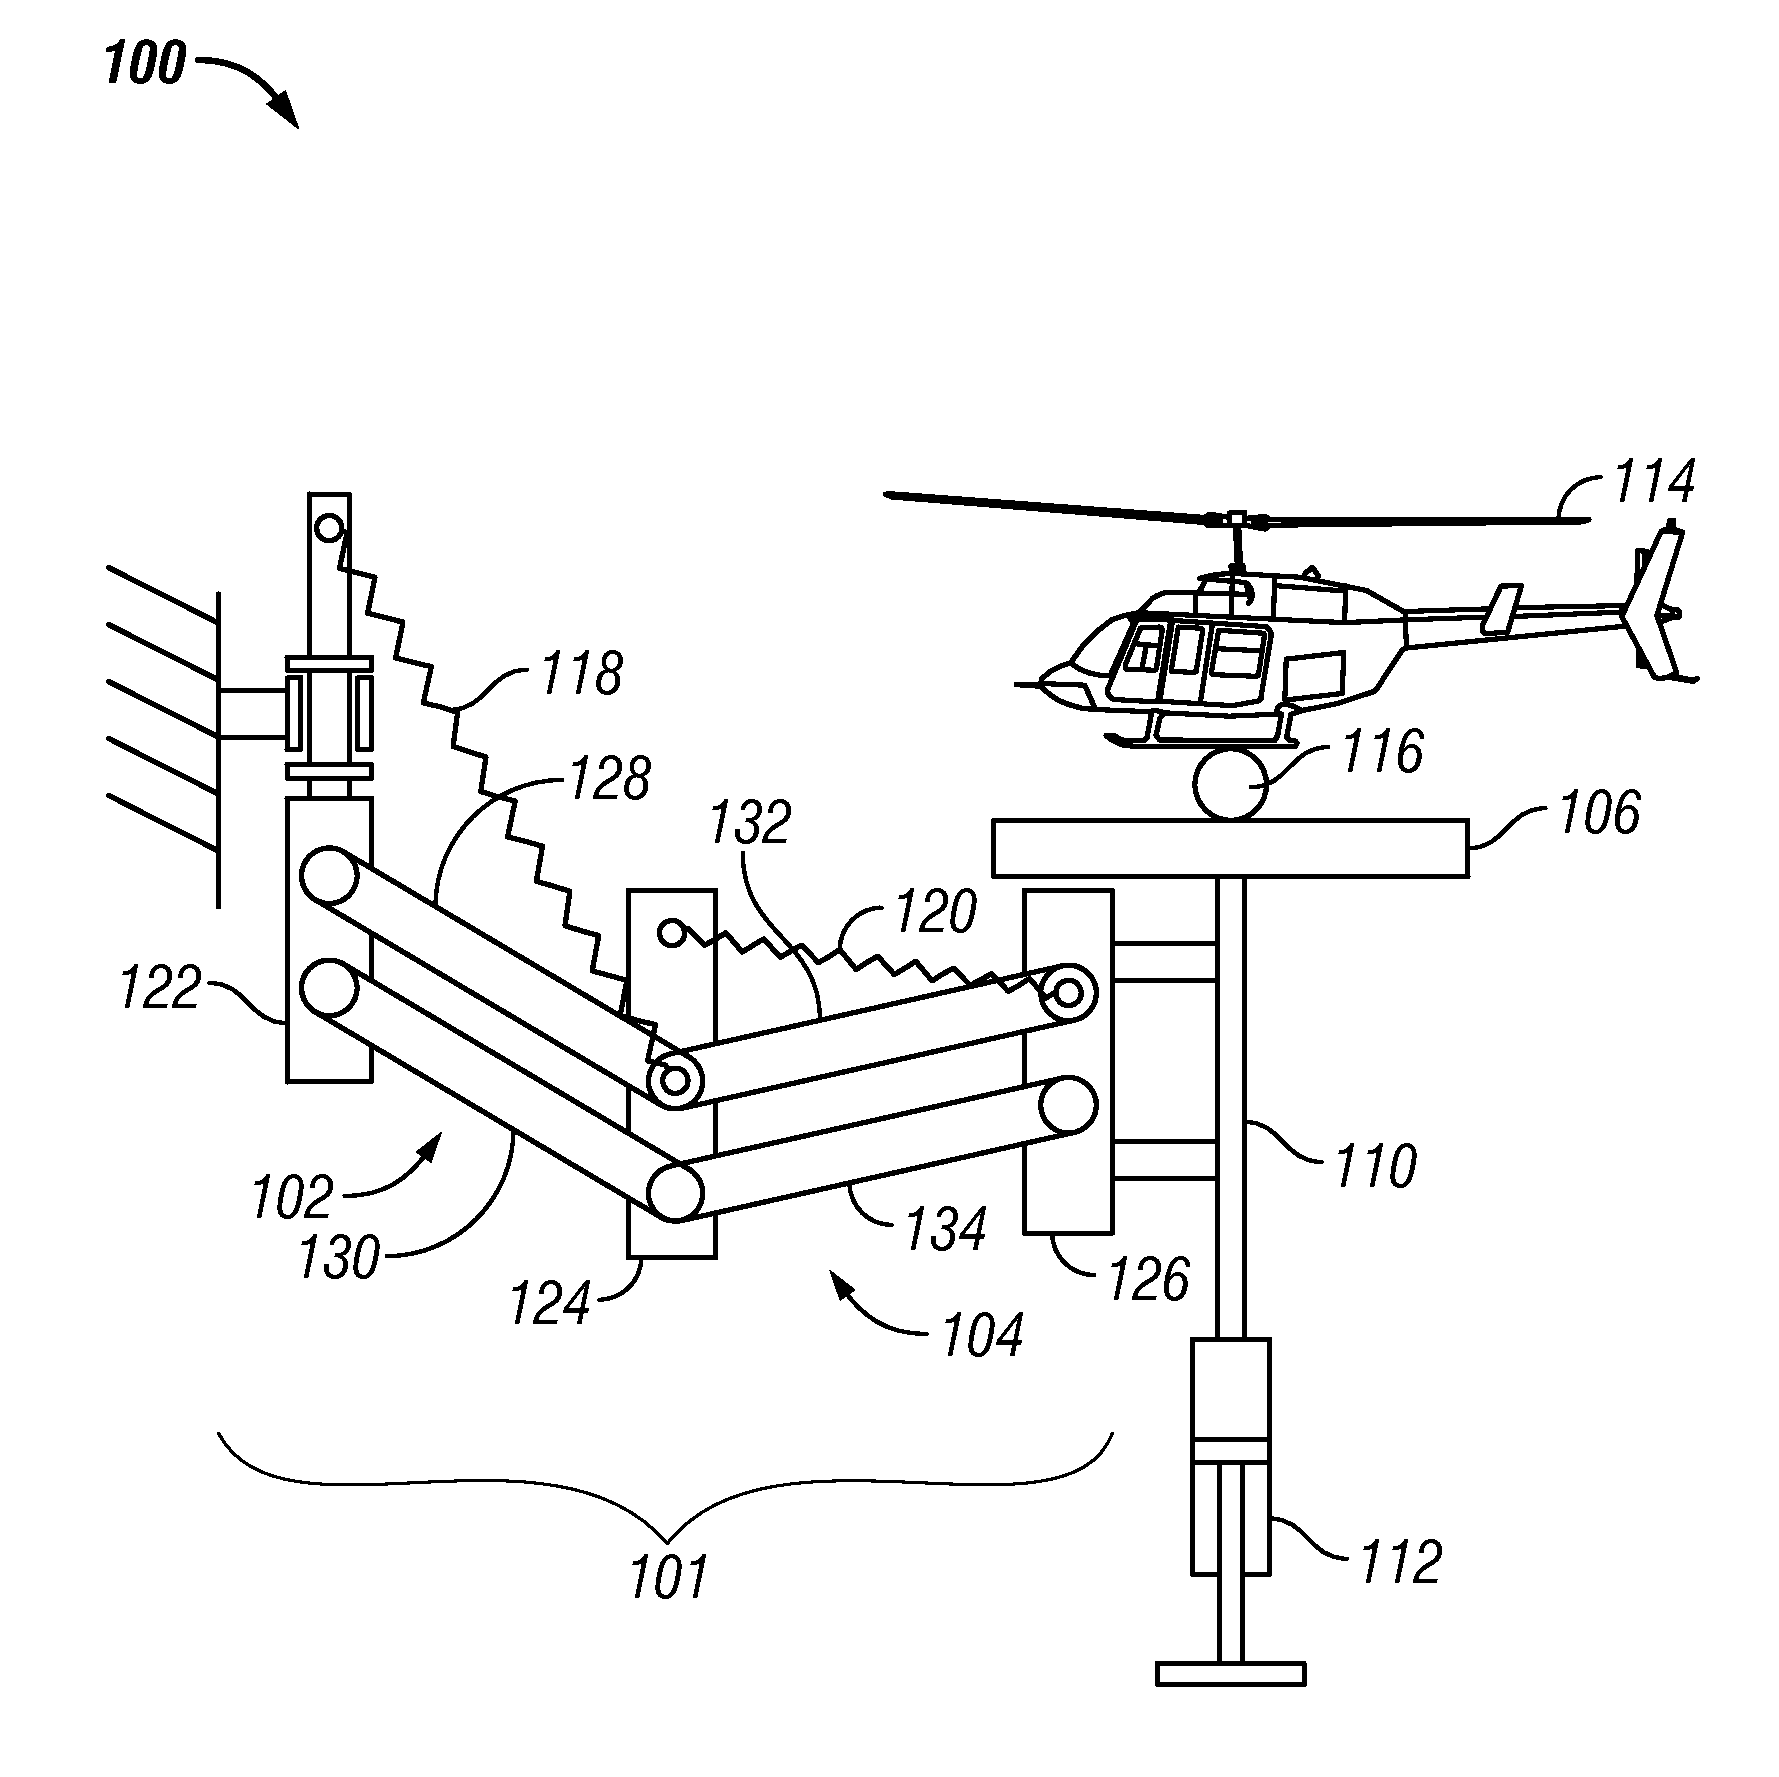 Multi-degree-of-freedom test stand for unmanned air vehicles